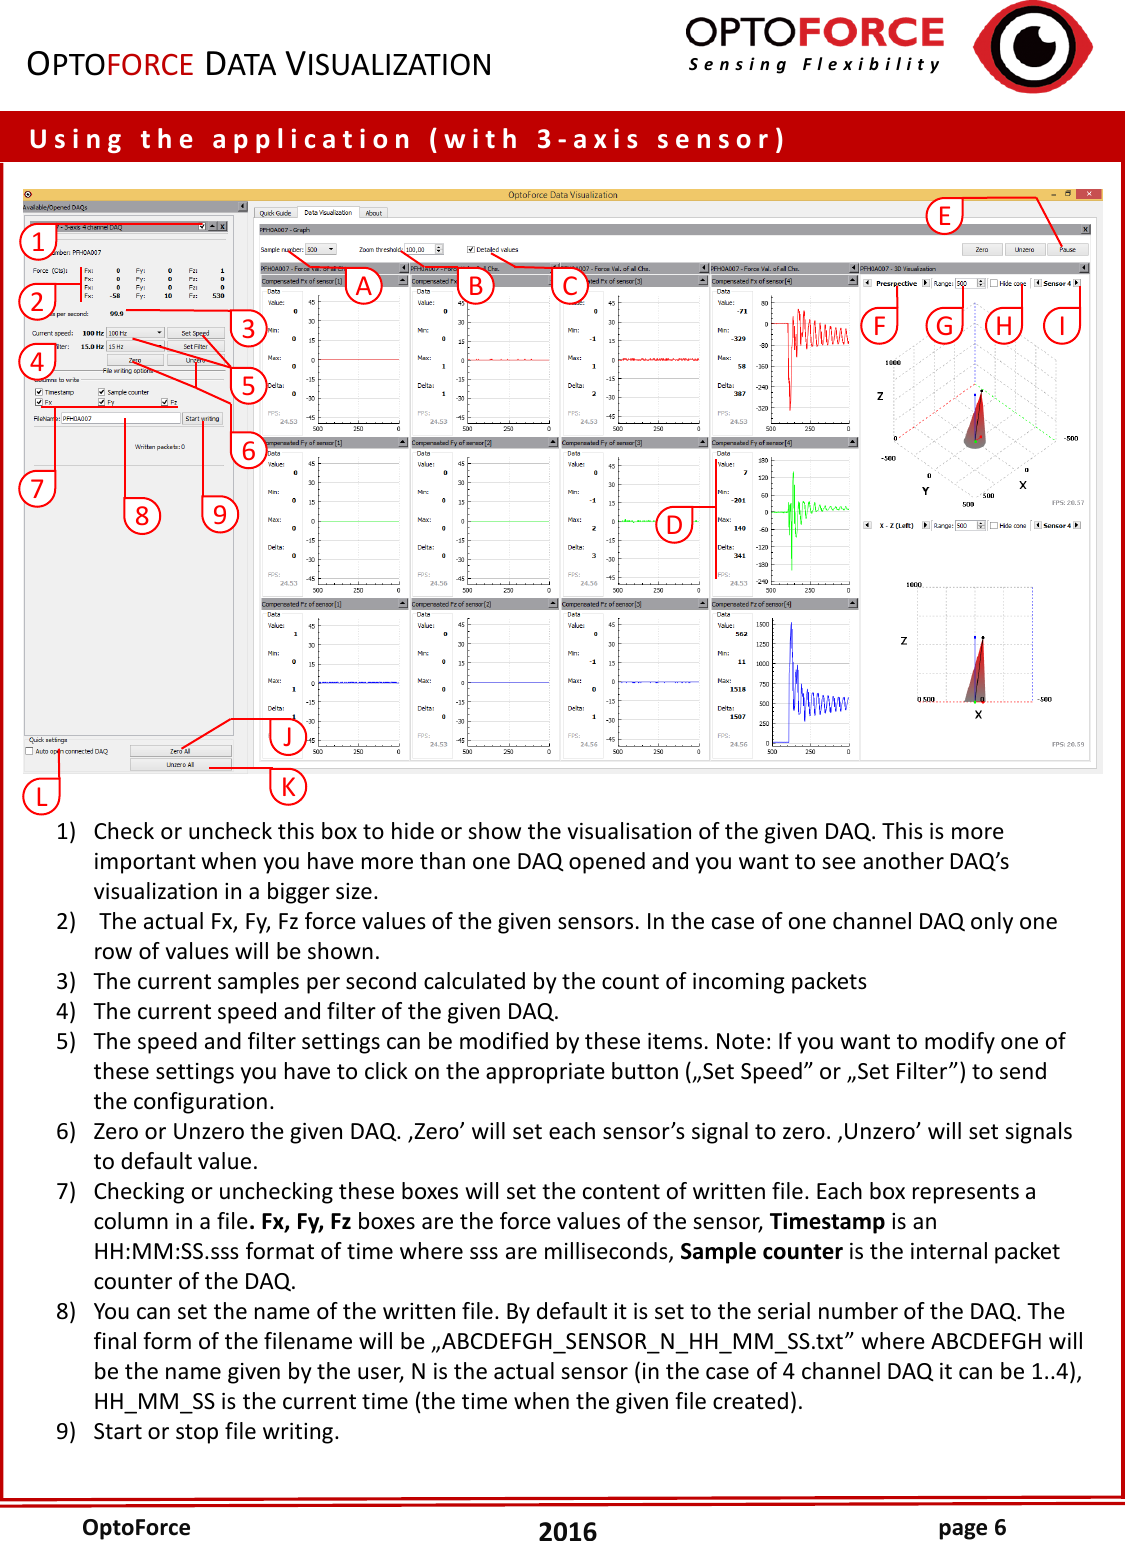 Page 6 of 12 - ODV User Guide ODV2